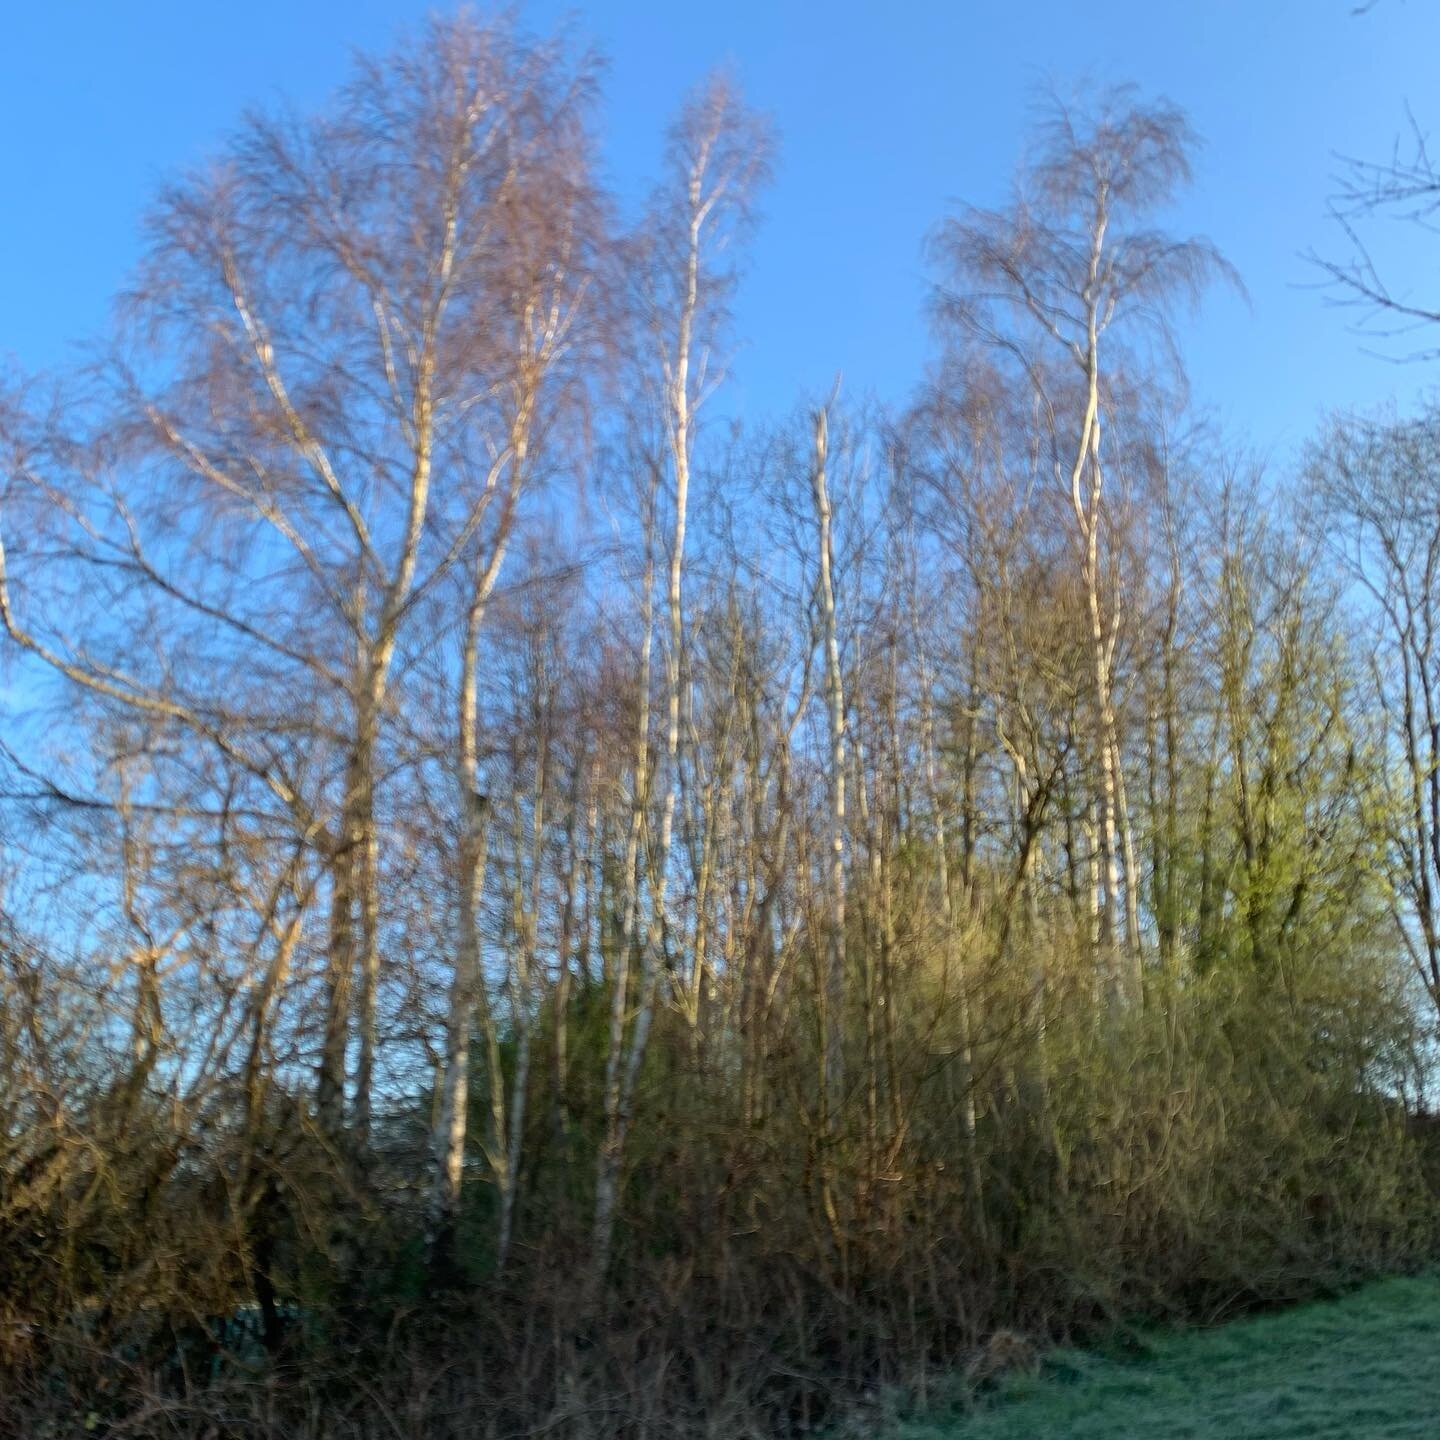 Springing into March. This mornings walk was to an orchestra of birds and a rhythm of crunchy footsteps breaking through the frosty grass. The clear blue sky was a great backdrop to the burgundy winter exposed branches of the silver birch. Last night